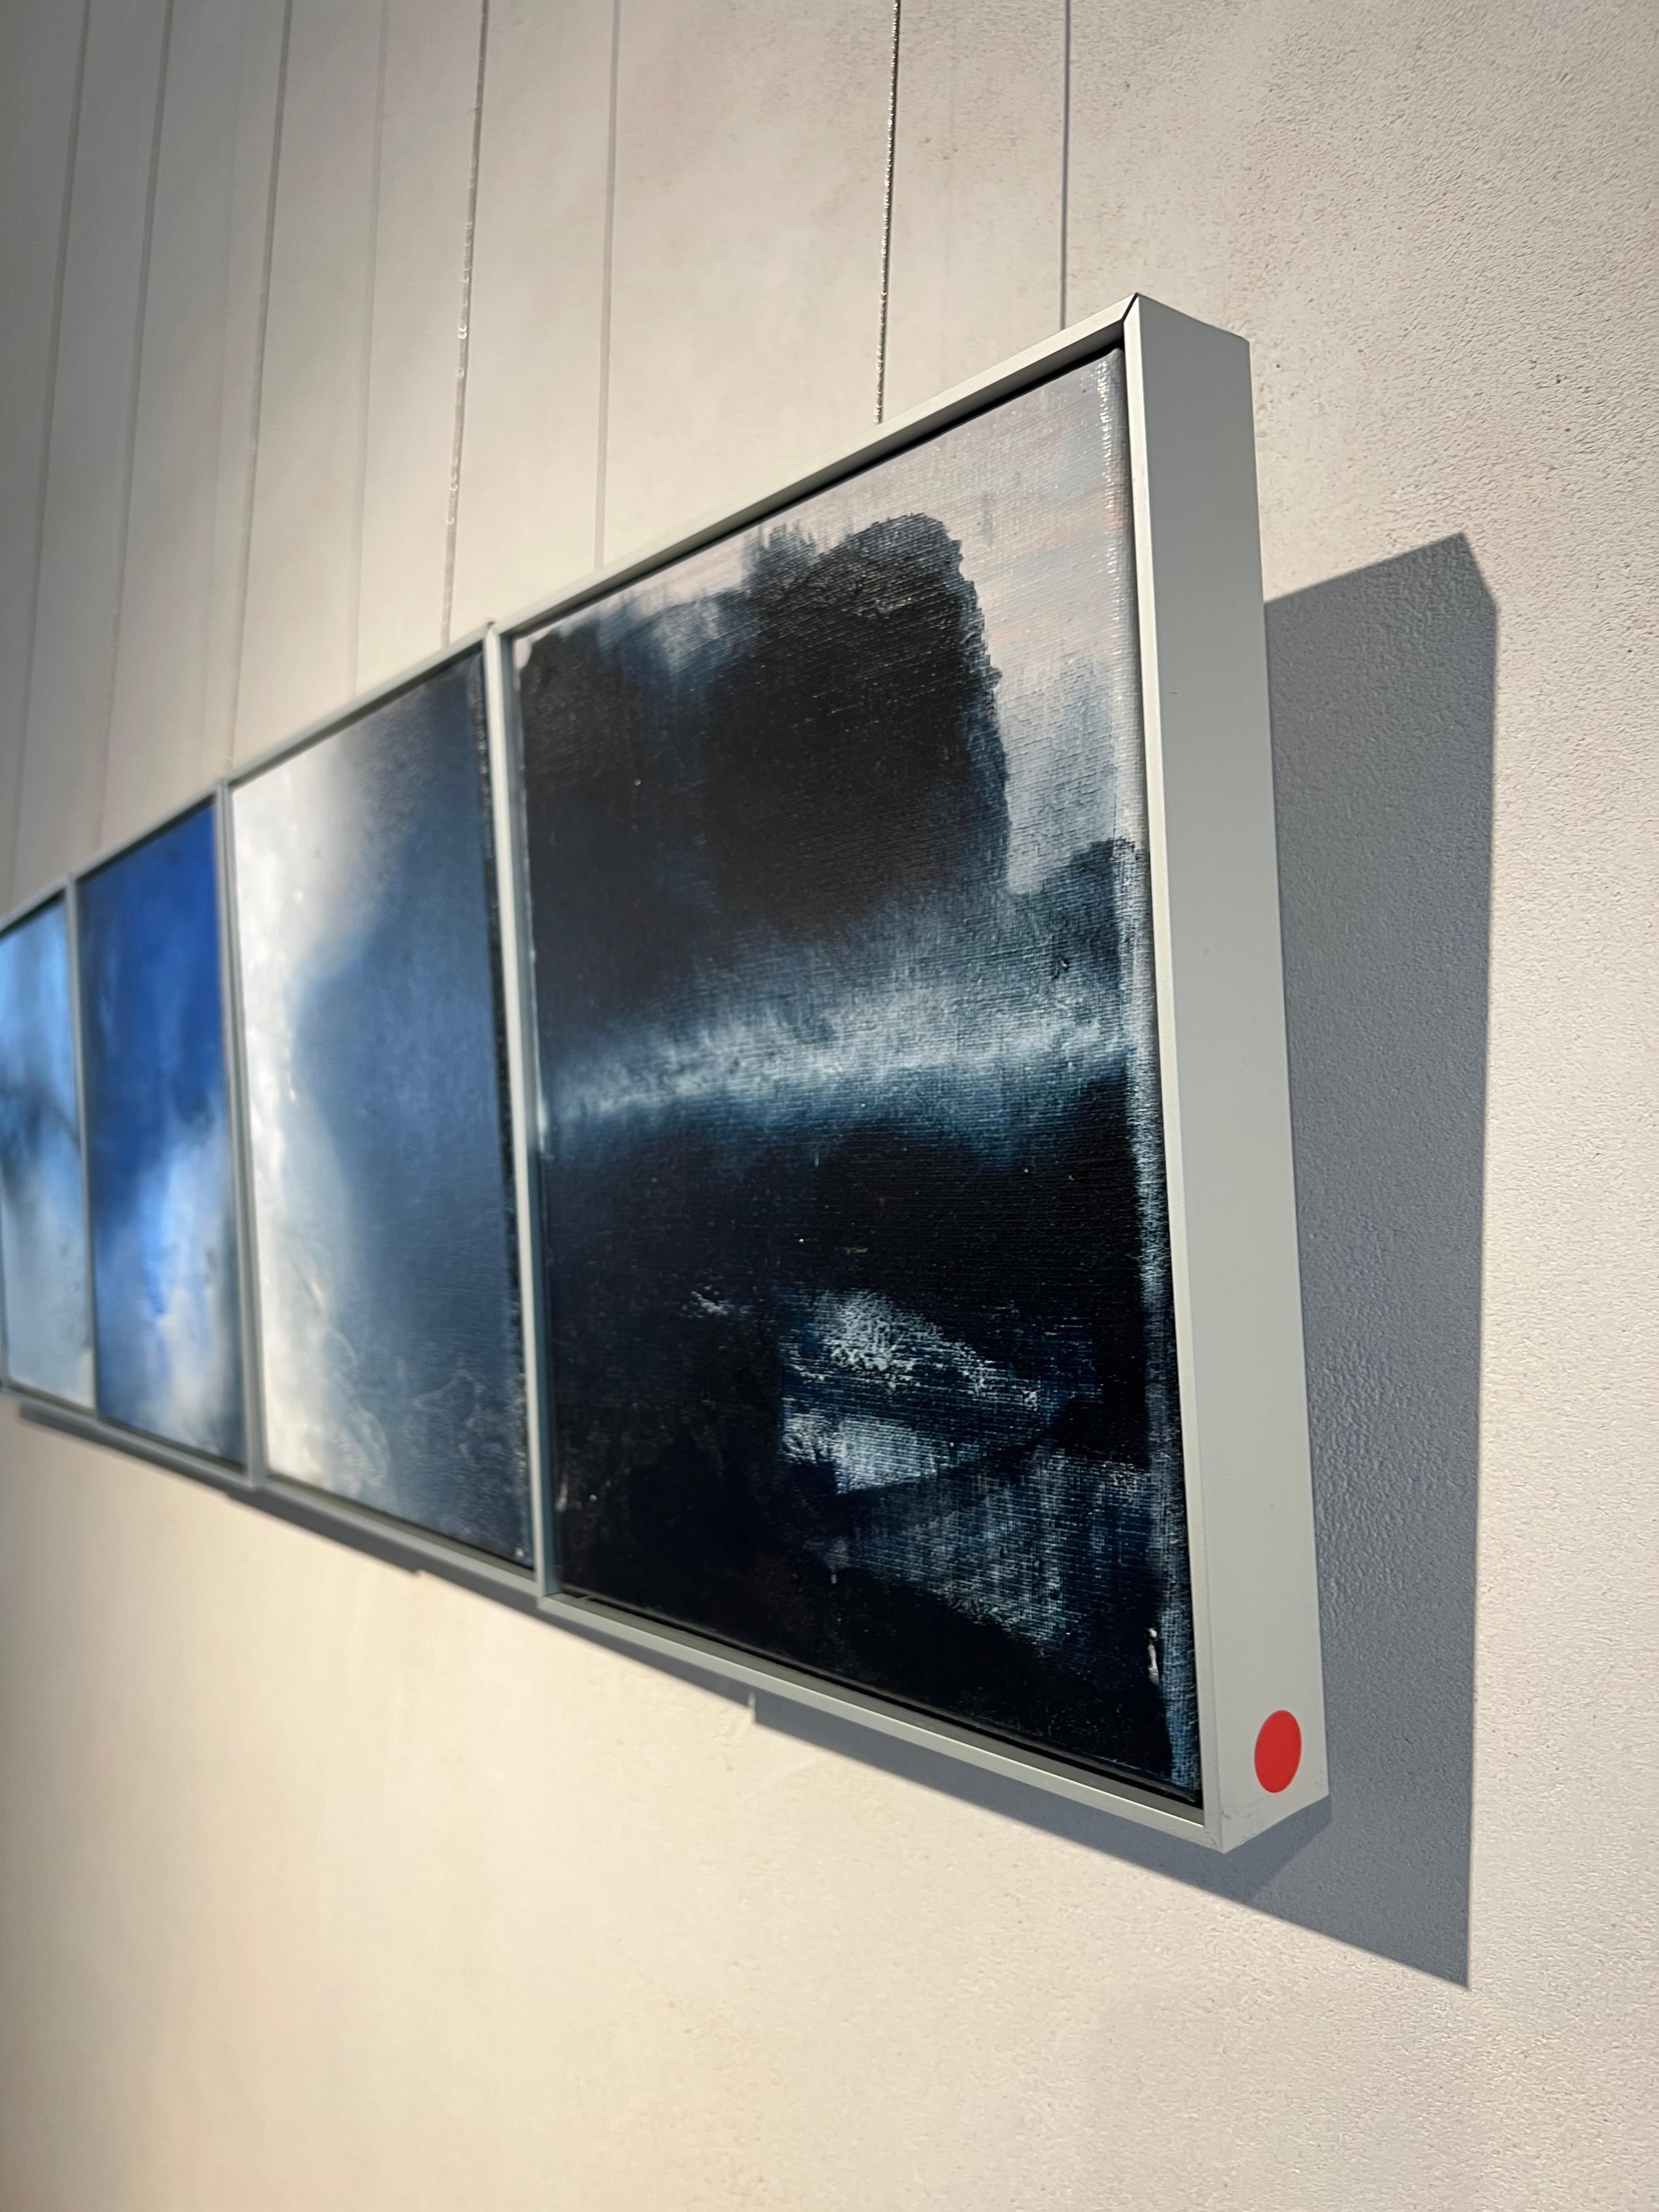 Landscape, oil on canvas with aluminum frame, sea blue, waves texture - Painting by Luis Moscardó